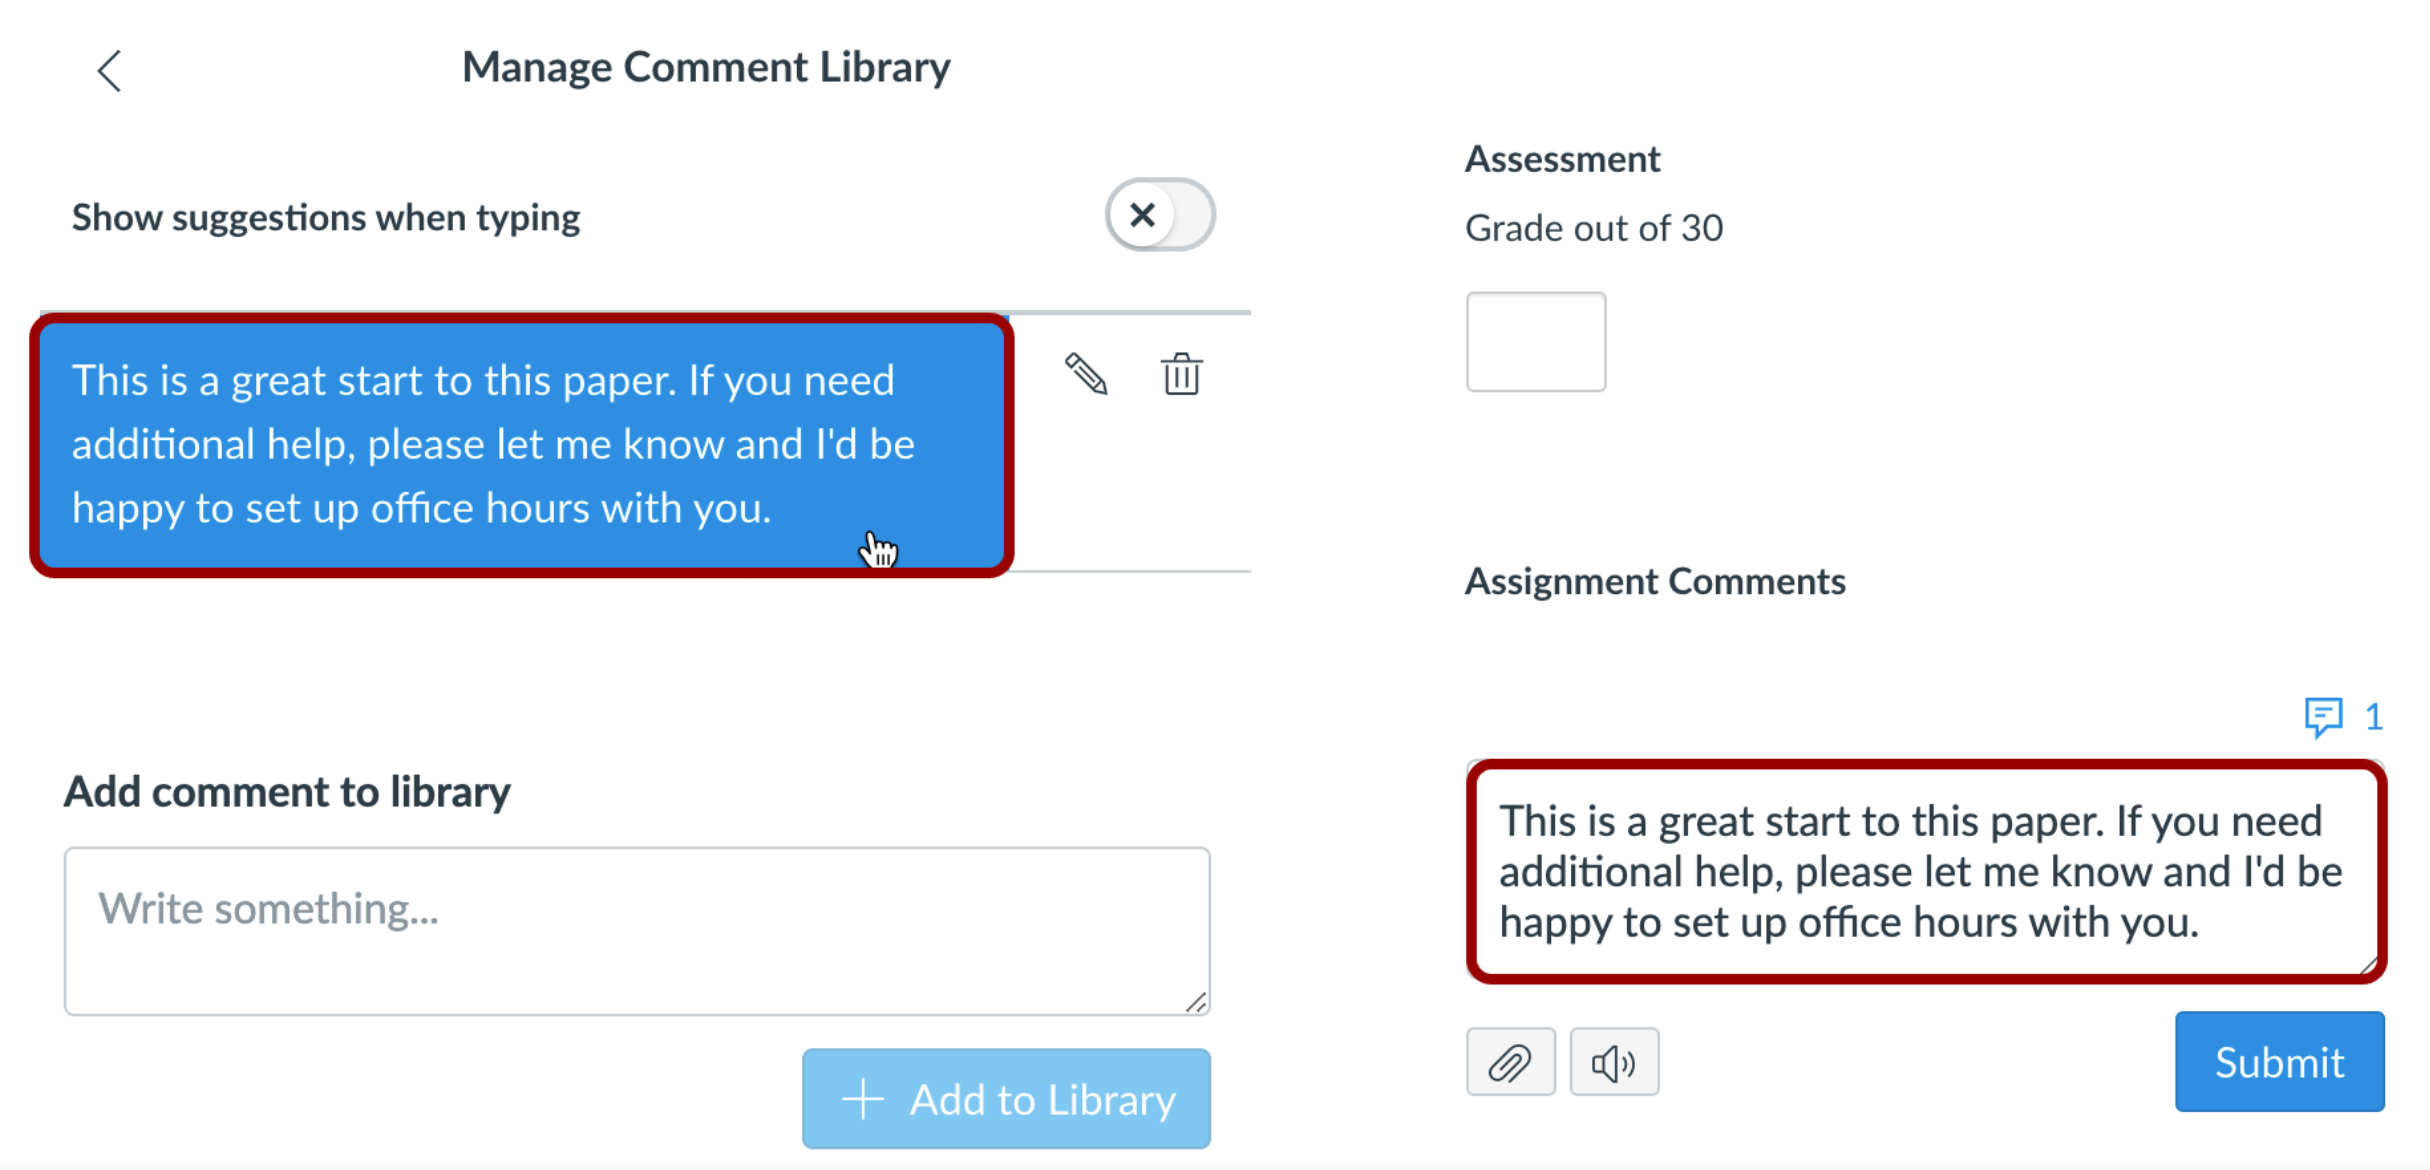 Image shows how to select and submit a comment from the comment library in SpeedGrader